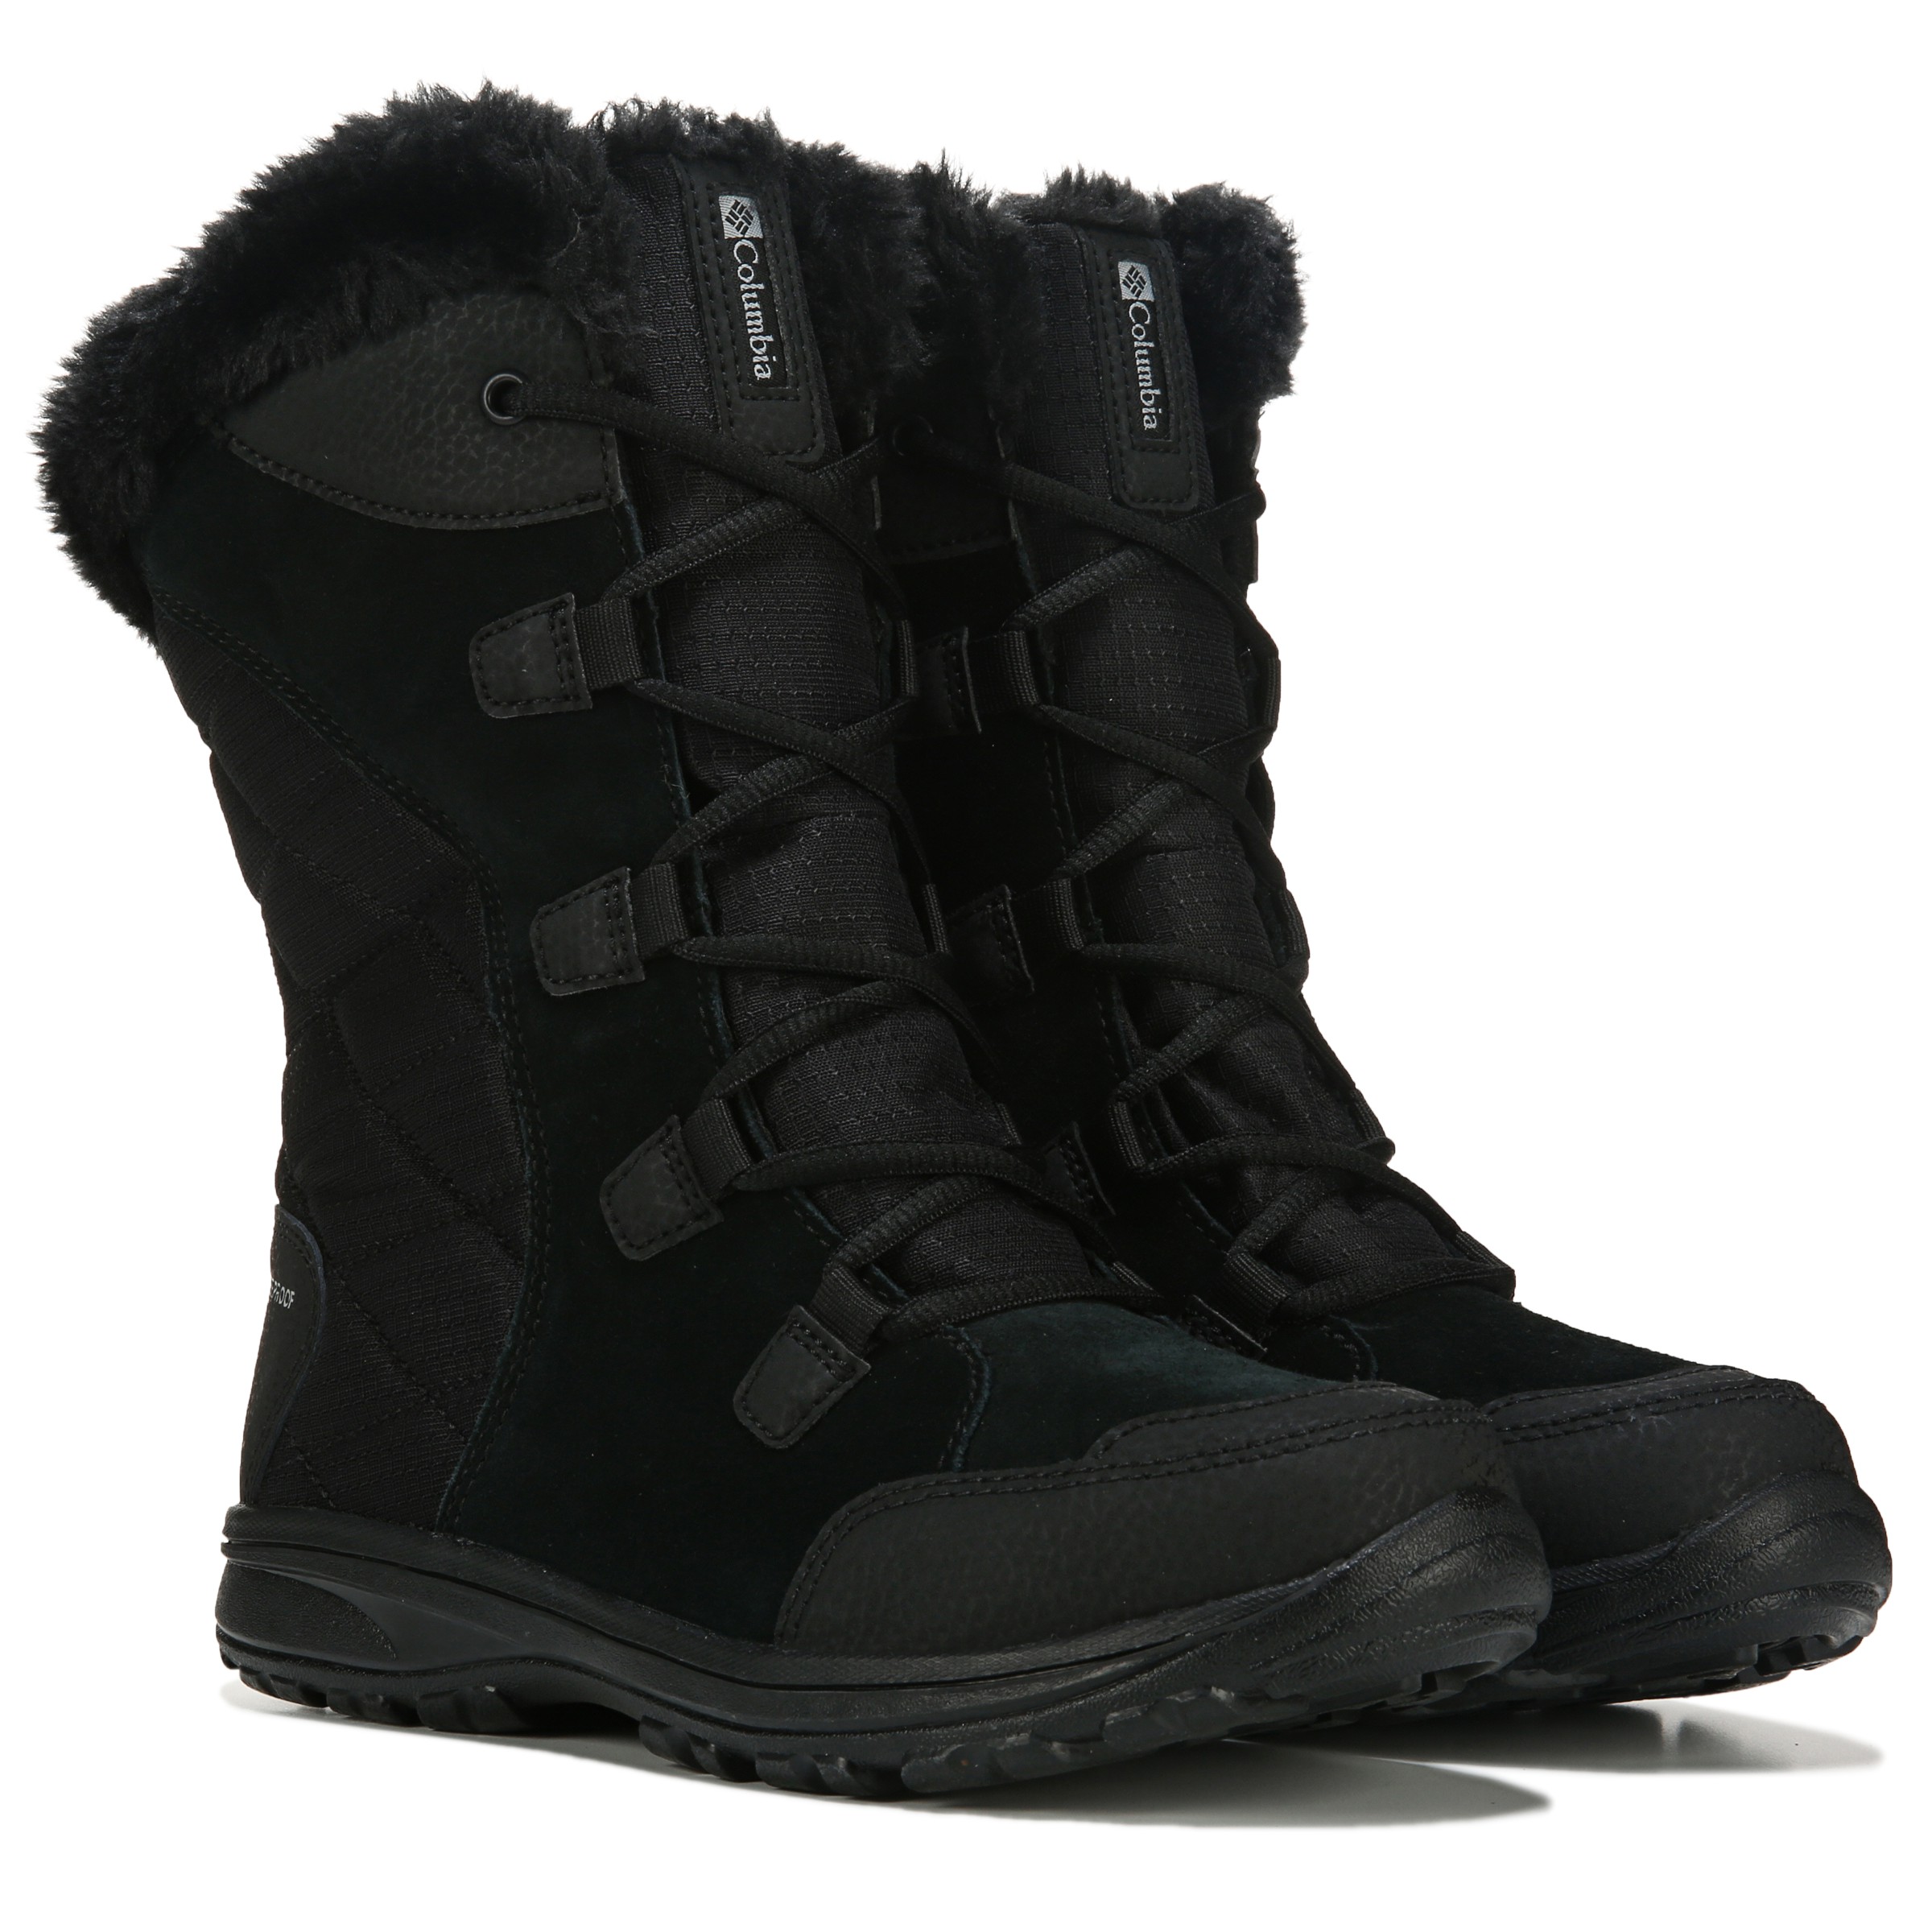 Shale Columbia Ice Maiden II Fur Lace-Up Women's Waterproof Winter Snow Boots 